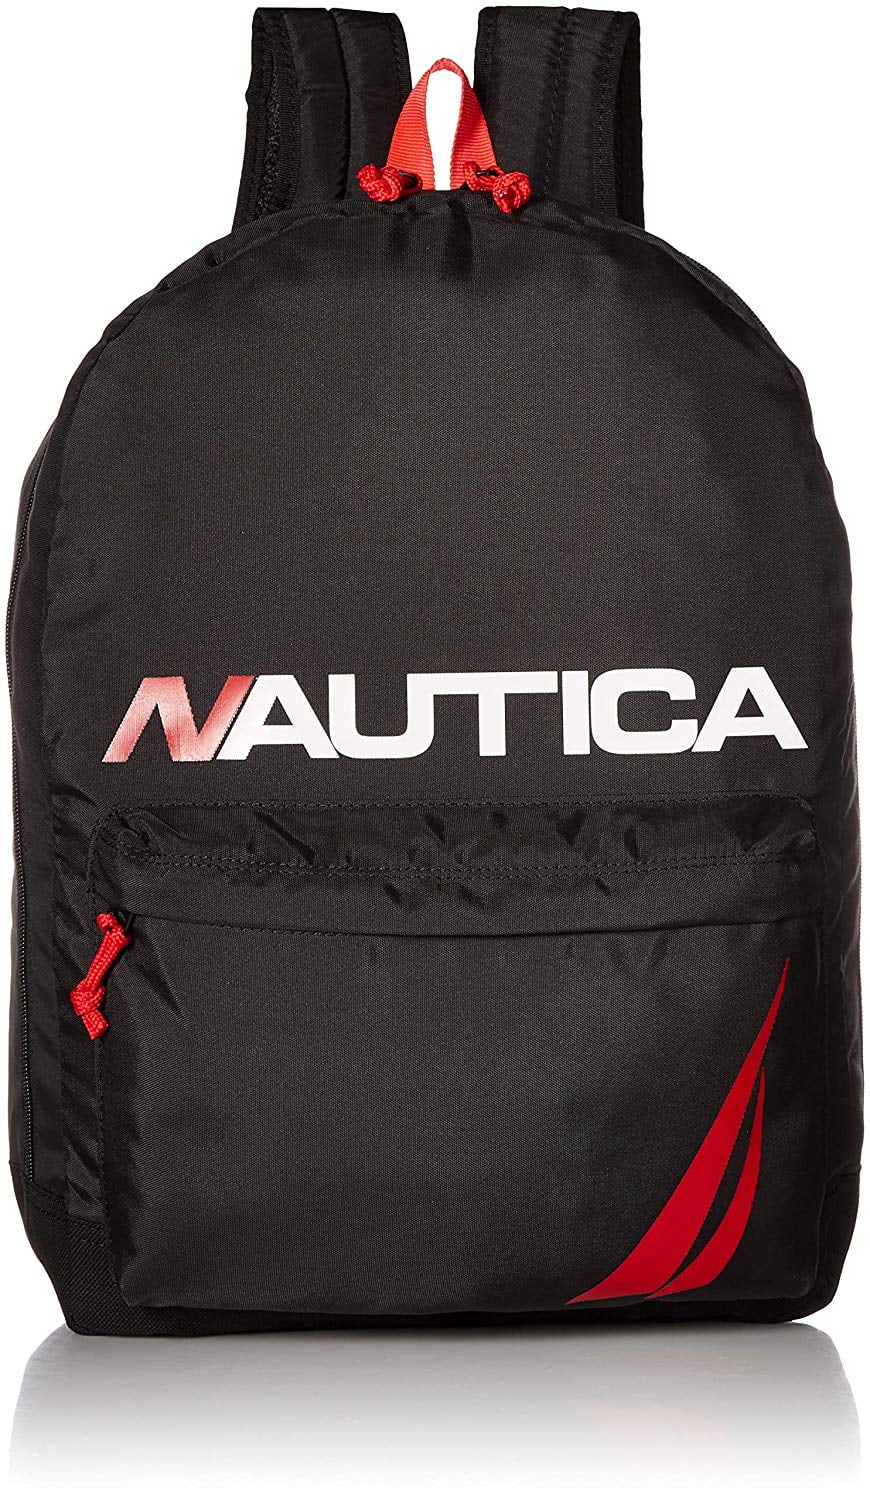 Nautica - Nautica Unisex Polyester Lightweight Backpack with Padded Laptop Sleeve , Adult, Black, OS